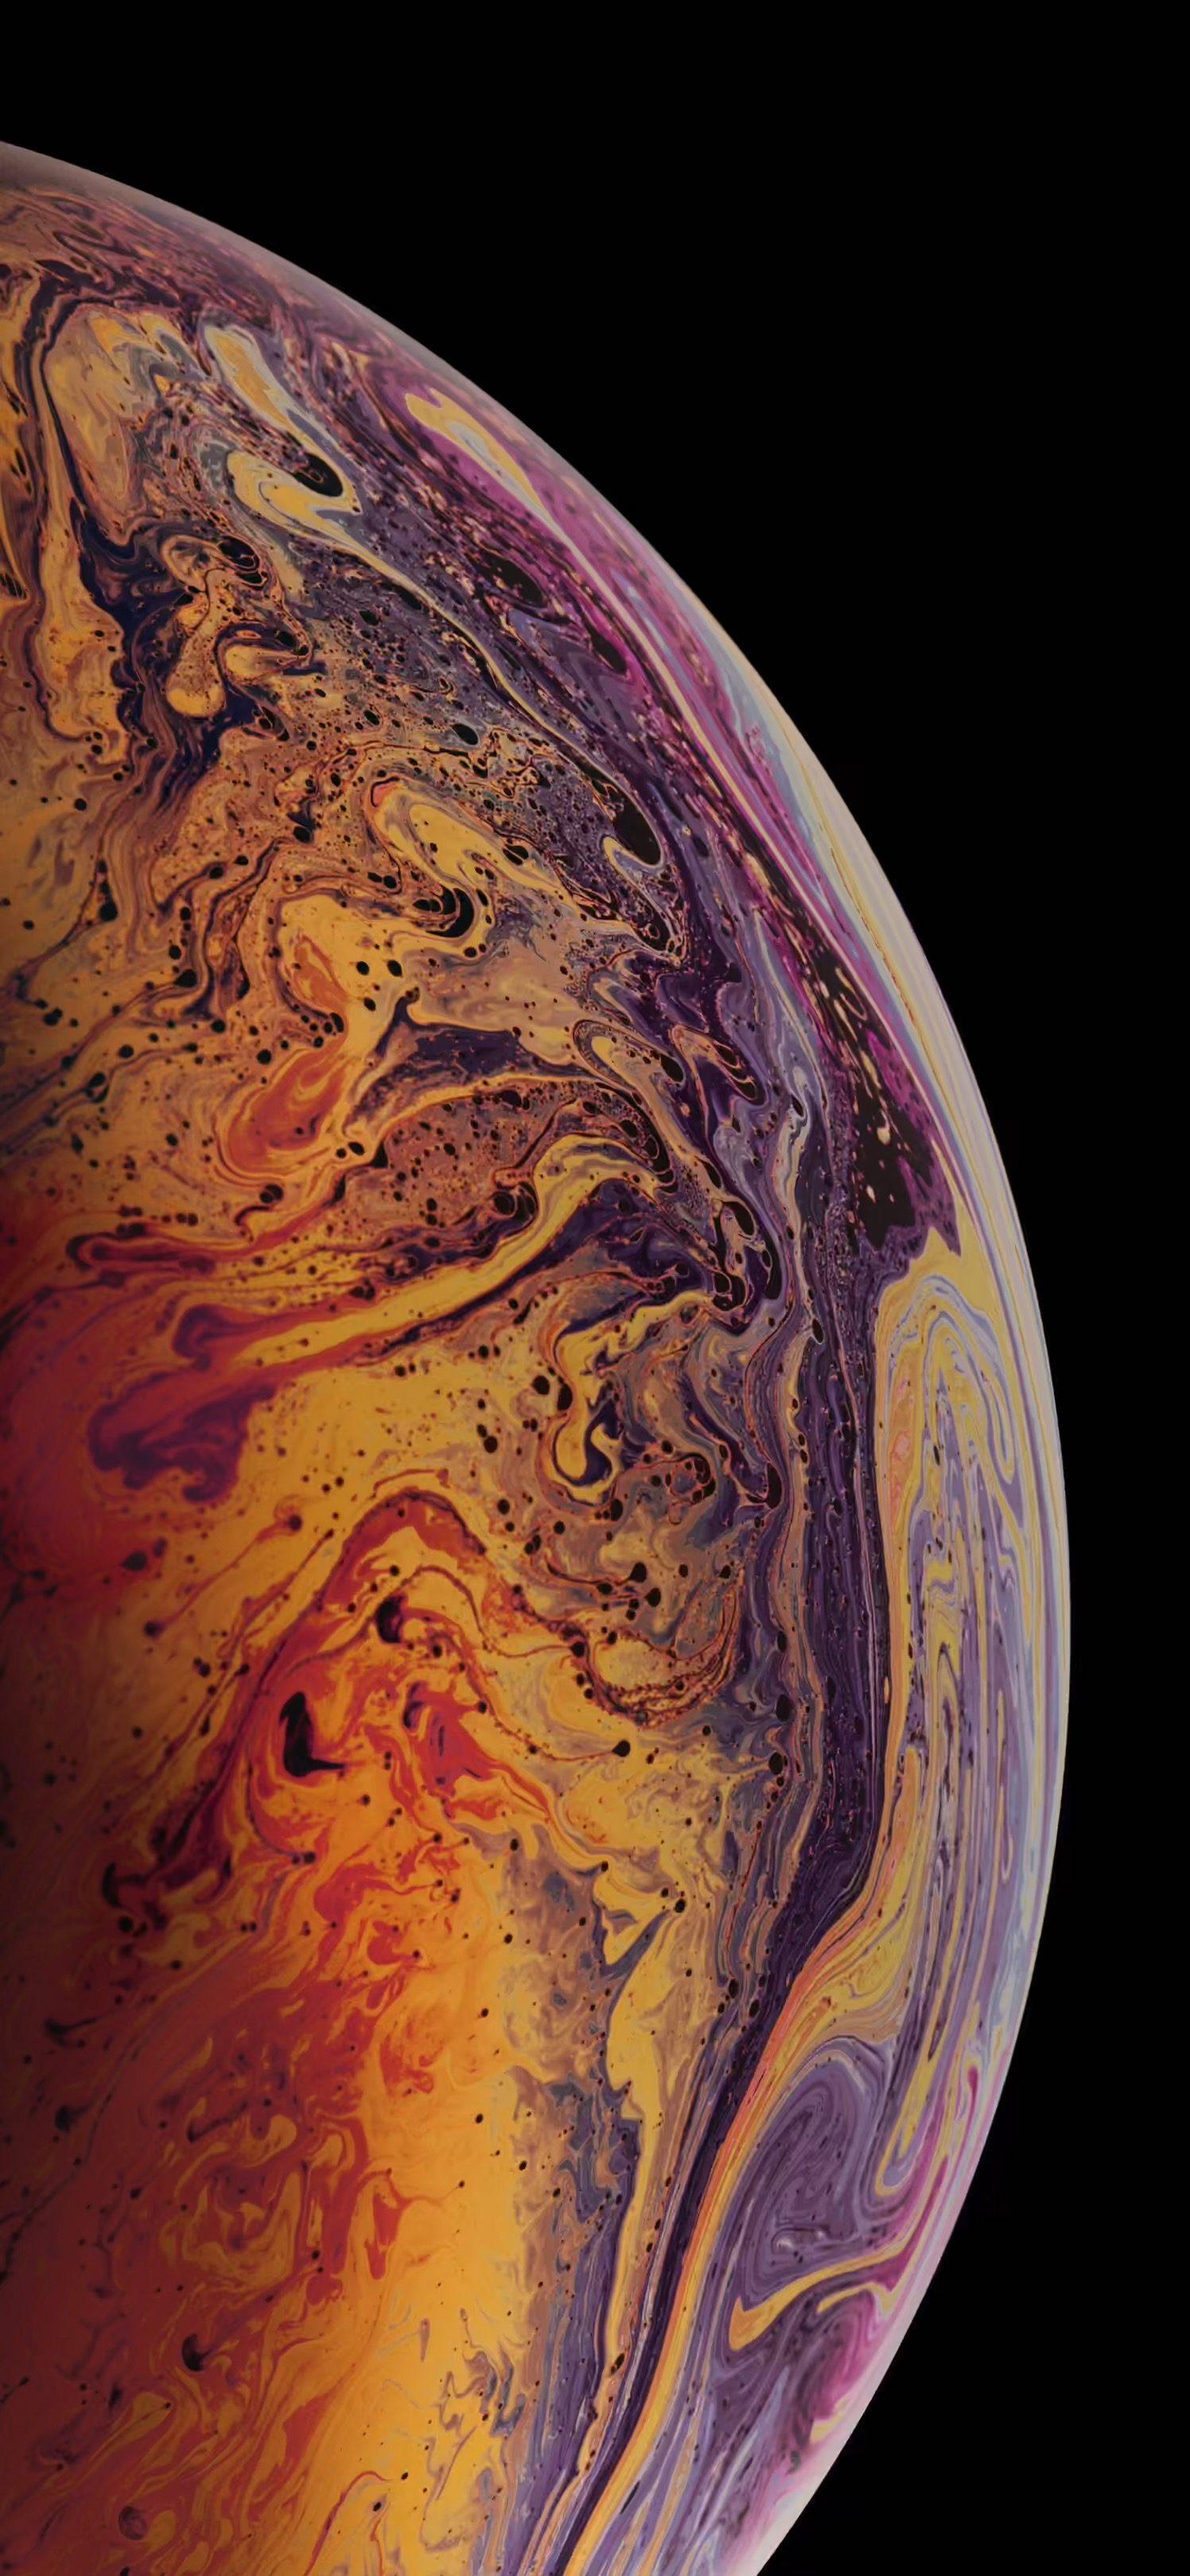 Download the new iPhone Xs and iPhone Xs Max wallpapers right here